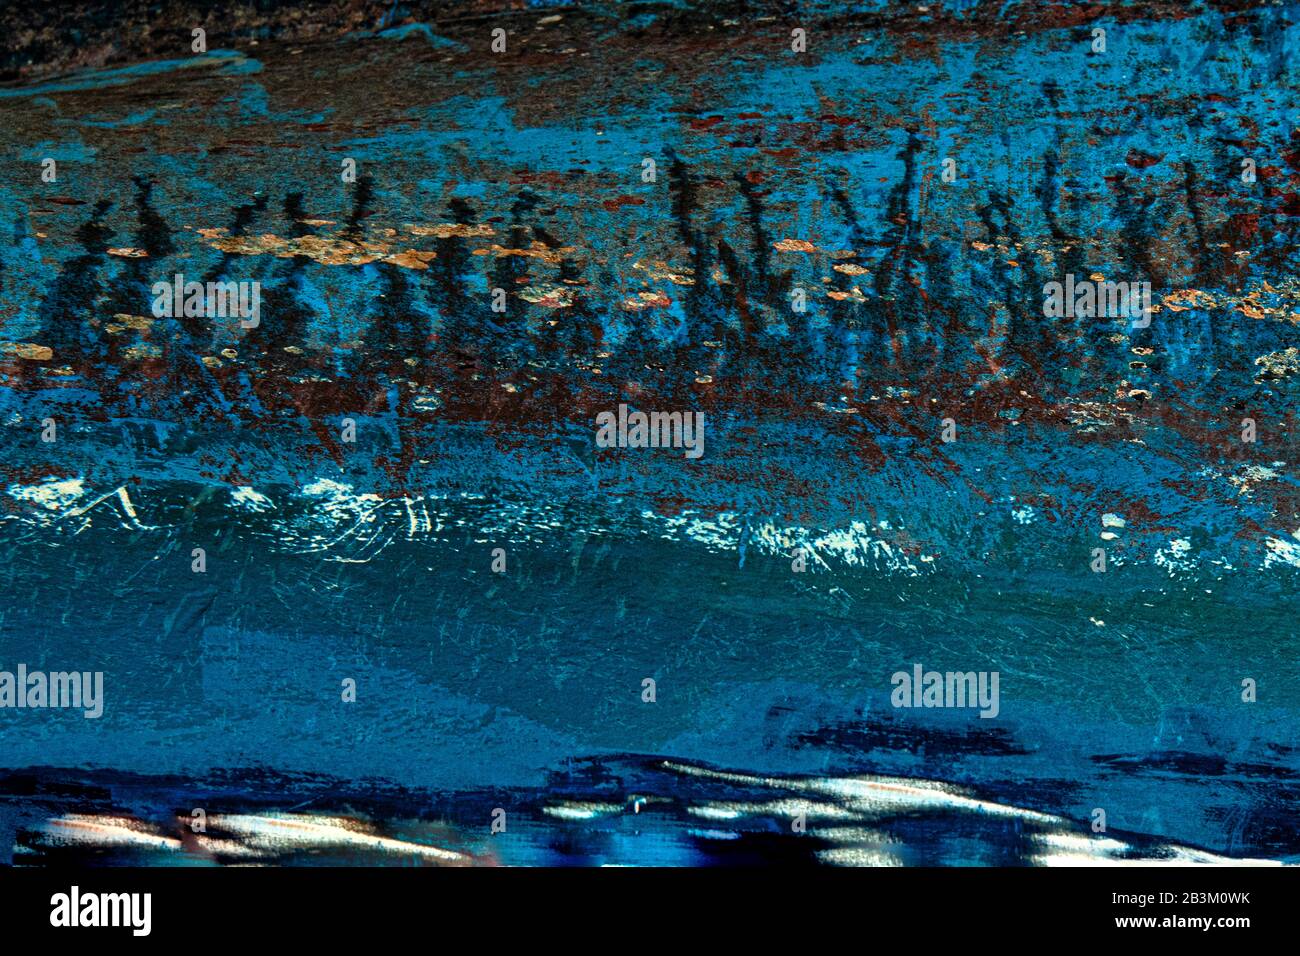 Abstract PhotographyUnder the sea Abstract Photography, blue boat,Abstract,concept, design Art,Pantone Classic Blue Color of the Year,under the sea Stock Photo